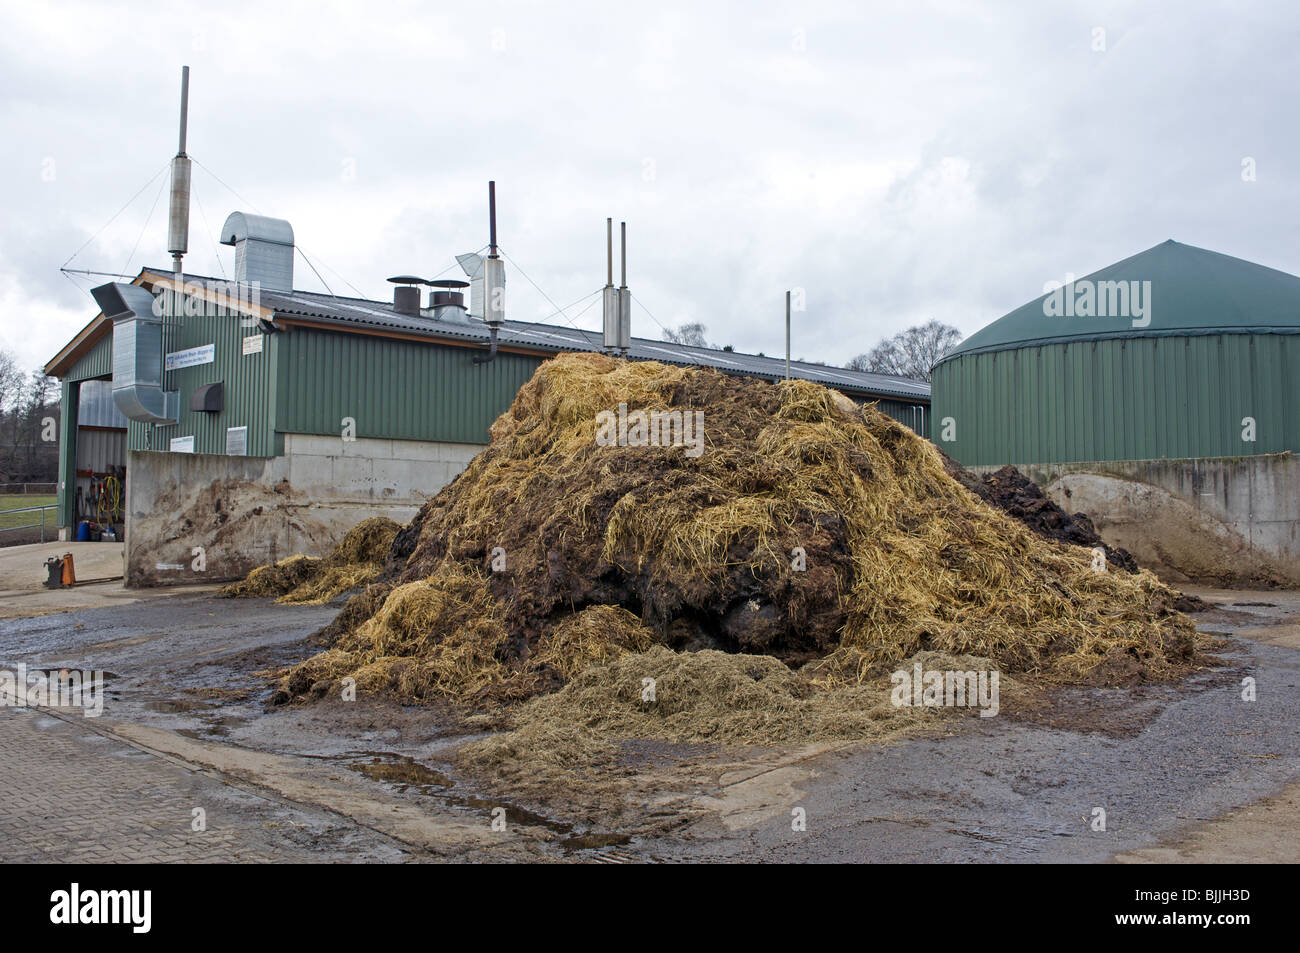 Farm producing biogas from animal waste Stock Photo